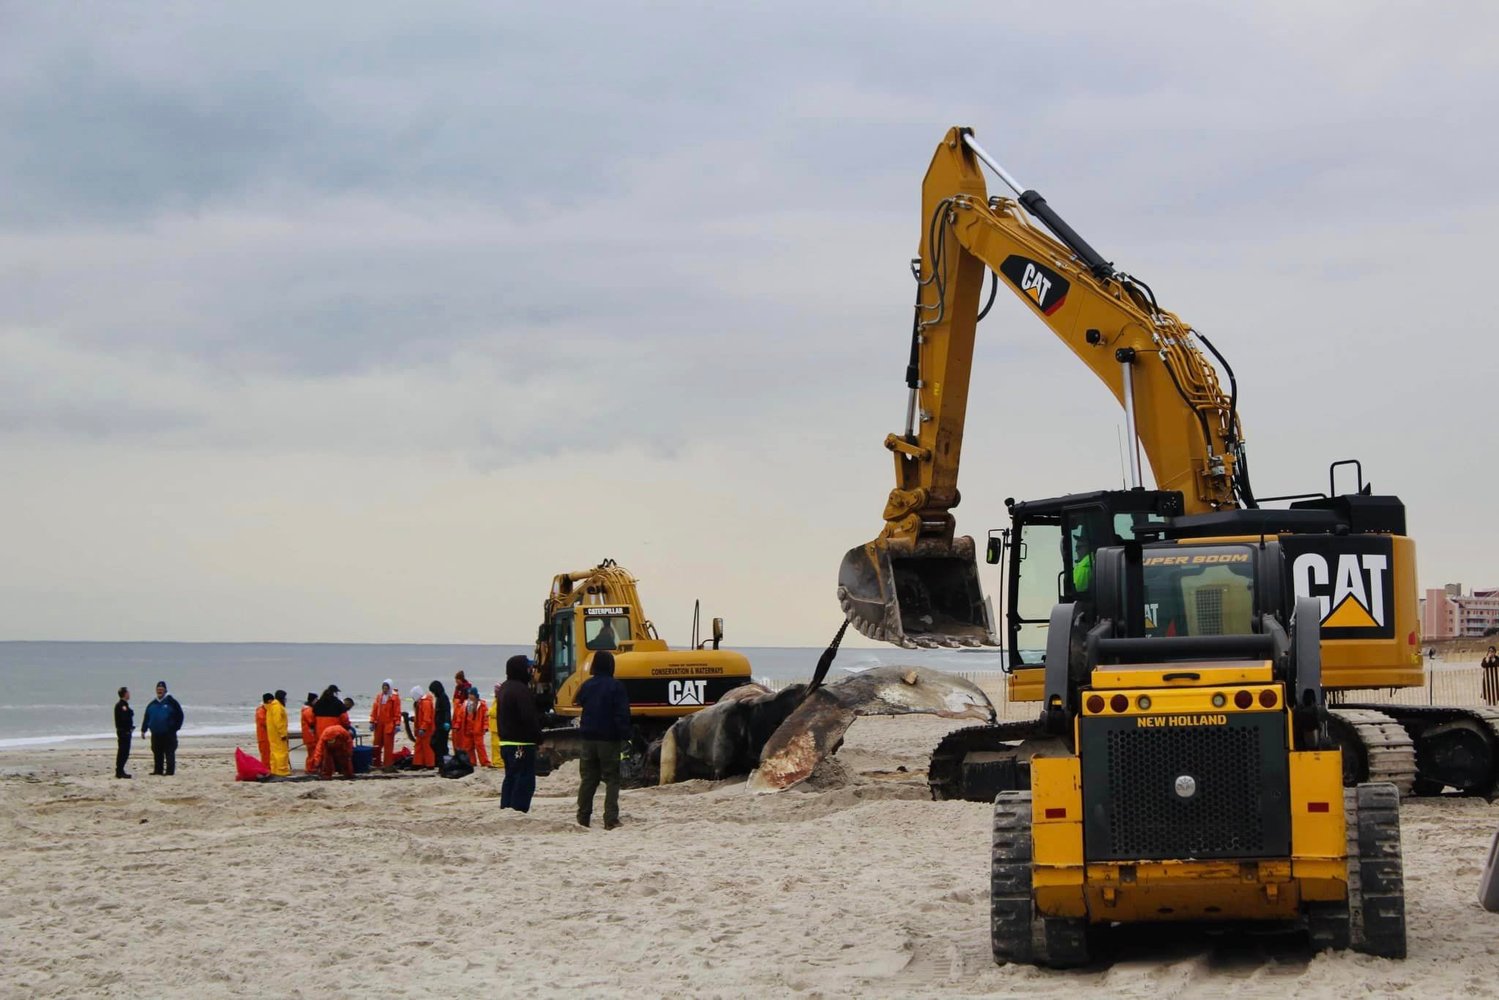 State and federal agencies performed an onsite necropsy, the whale was buried in the dunes afterwards.